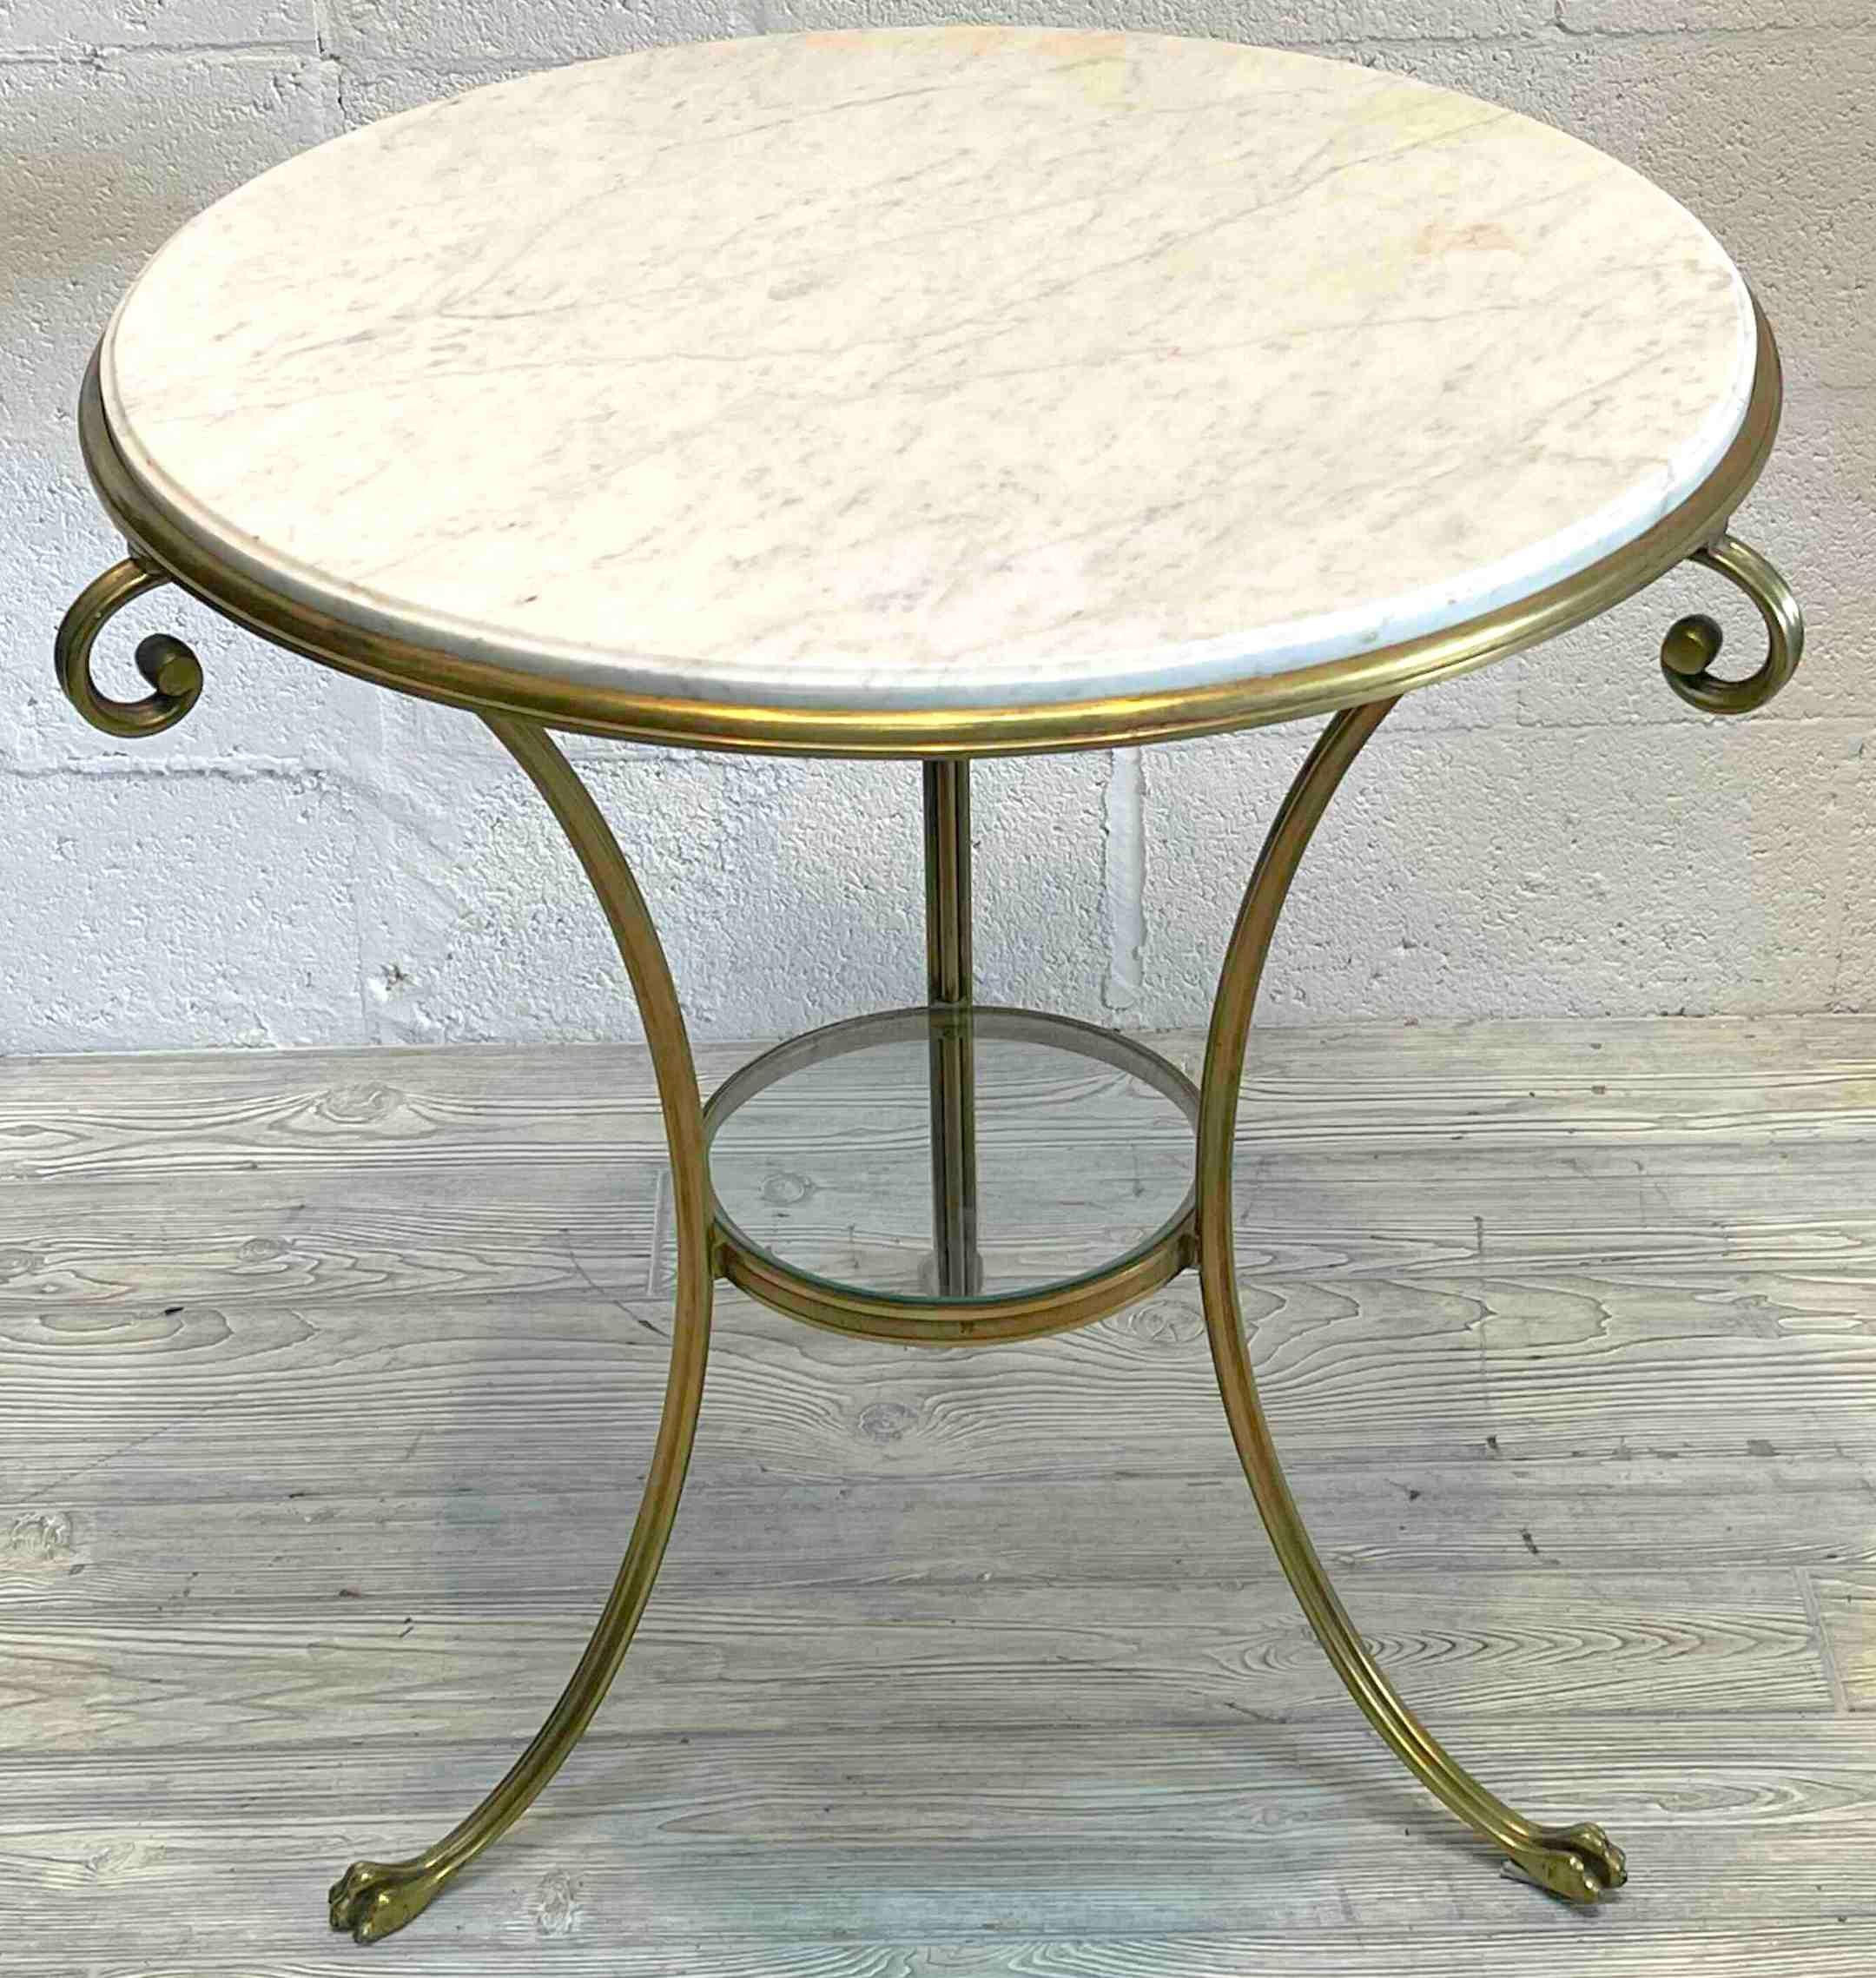 French neoclassical gilt bronze & marble gueridon, of typical form with inset Carrera marble top, raised by three finely cast reeded paw feet, with an inset 9